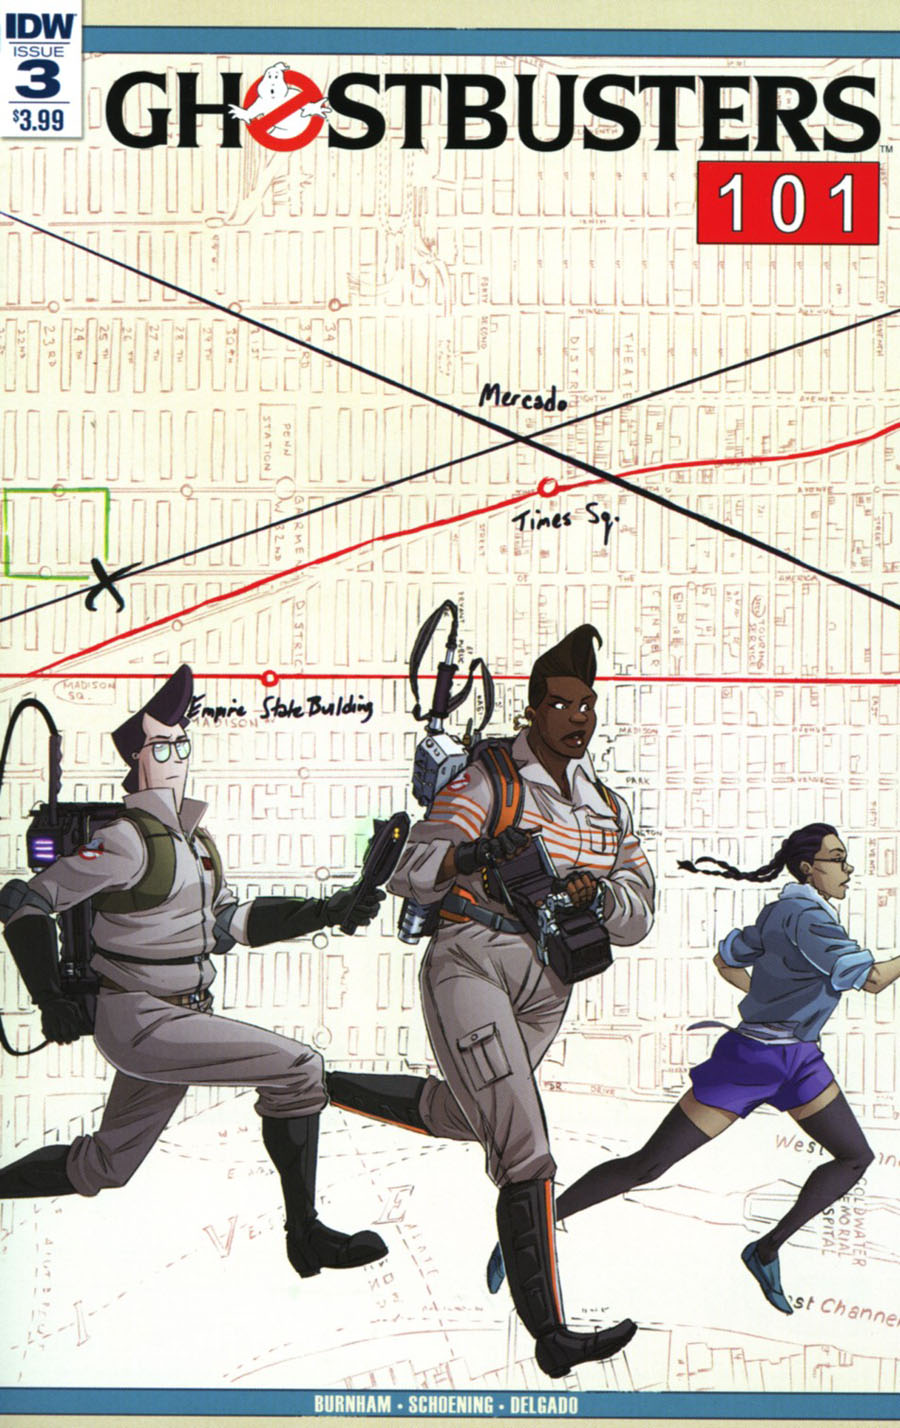 Ghostbusters 101 #3 Cover A Regular Dan Schoening Cover